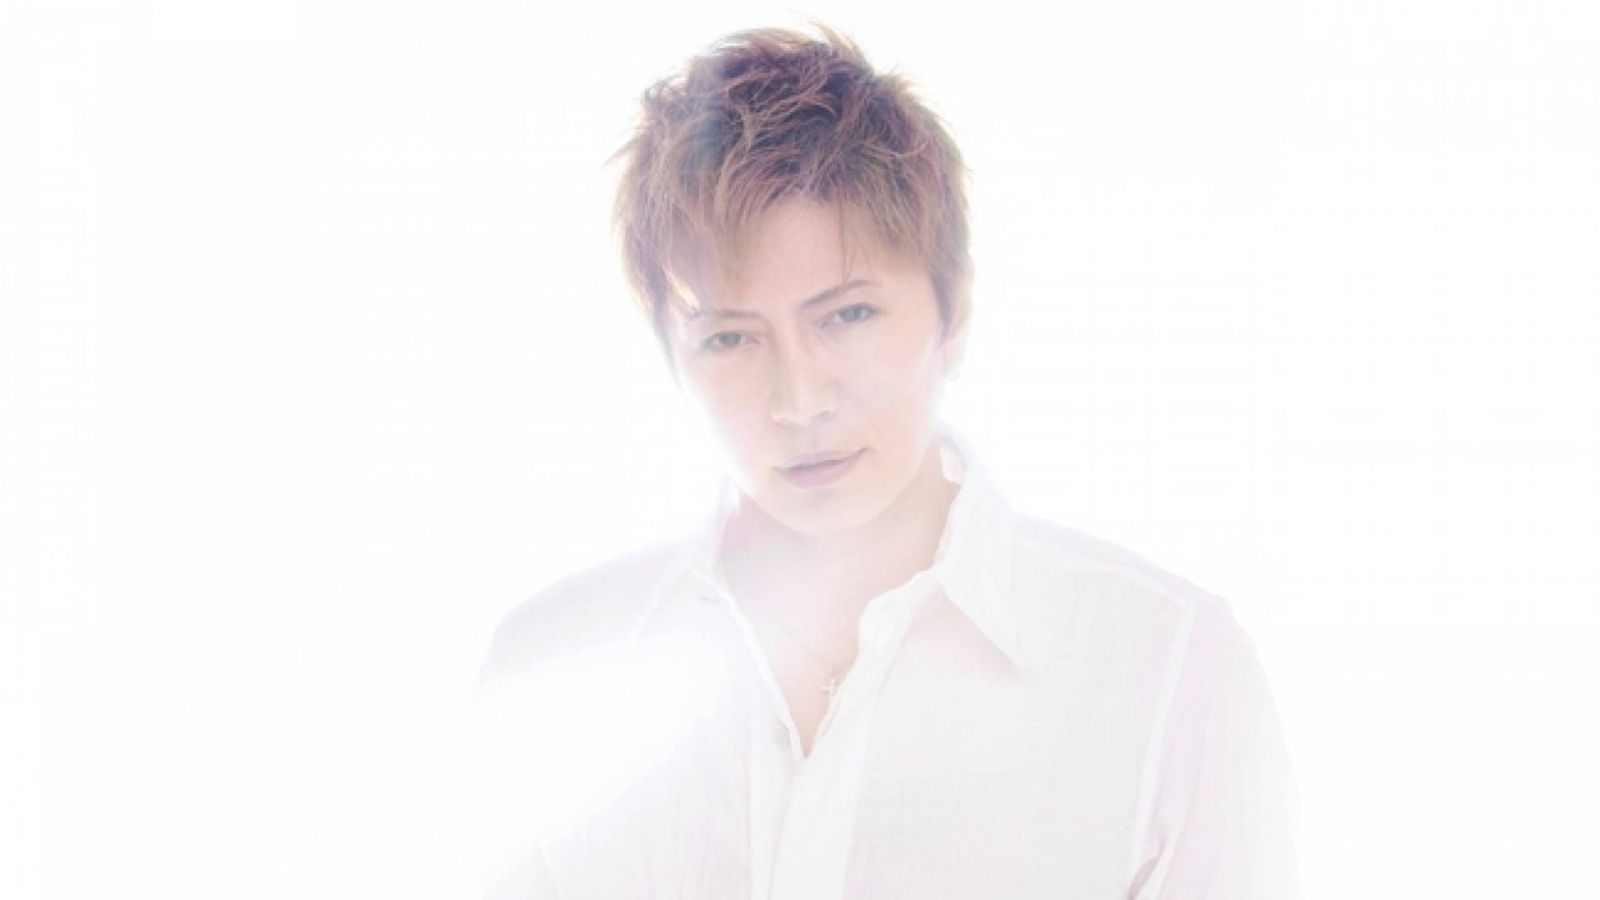 Recut Single from GACKT © G-PRO. All Rights Reserved.